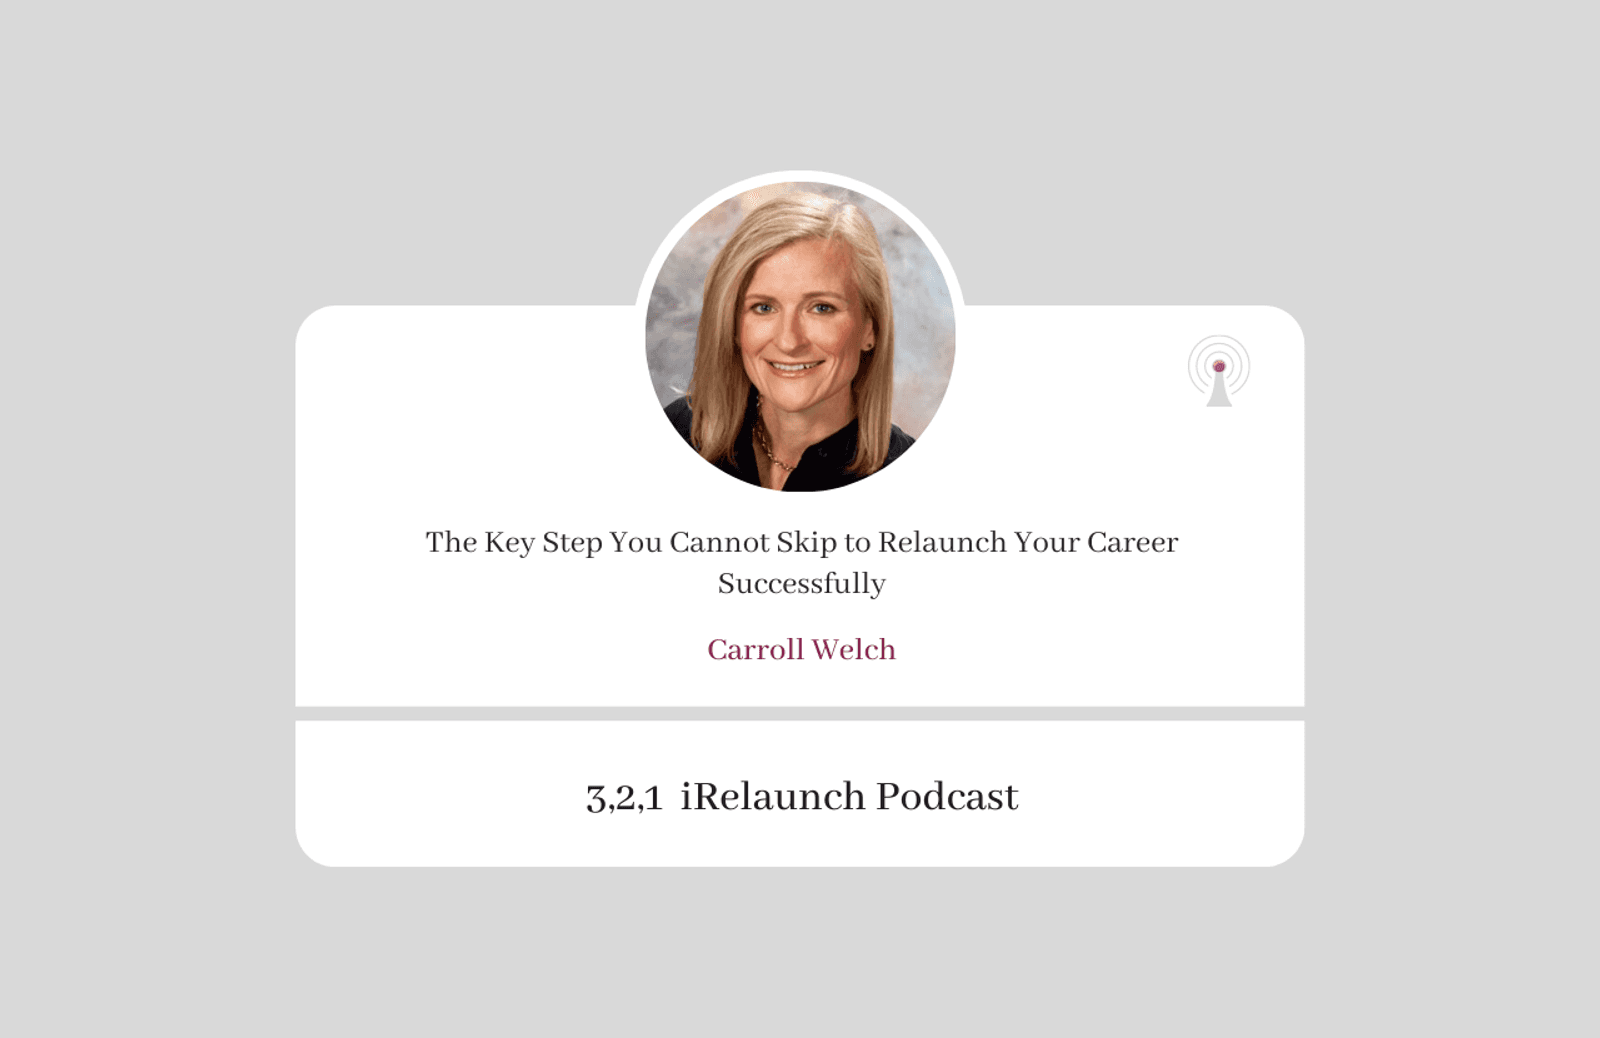 3, 2, 1 iRelaunch Podcast Thumbnail for Episode #6 with Carroll Welch's headshot. The episode's title is: "The Key Step You Cannot Skip to Relaunch Your Career Successfully."